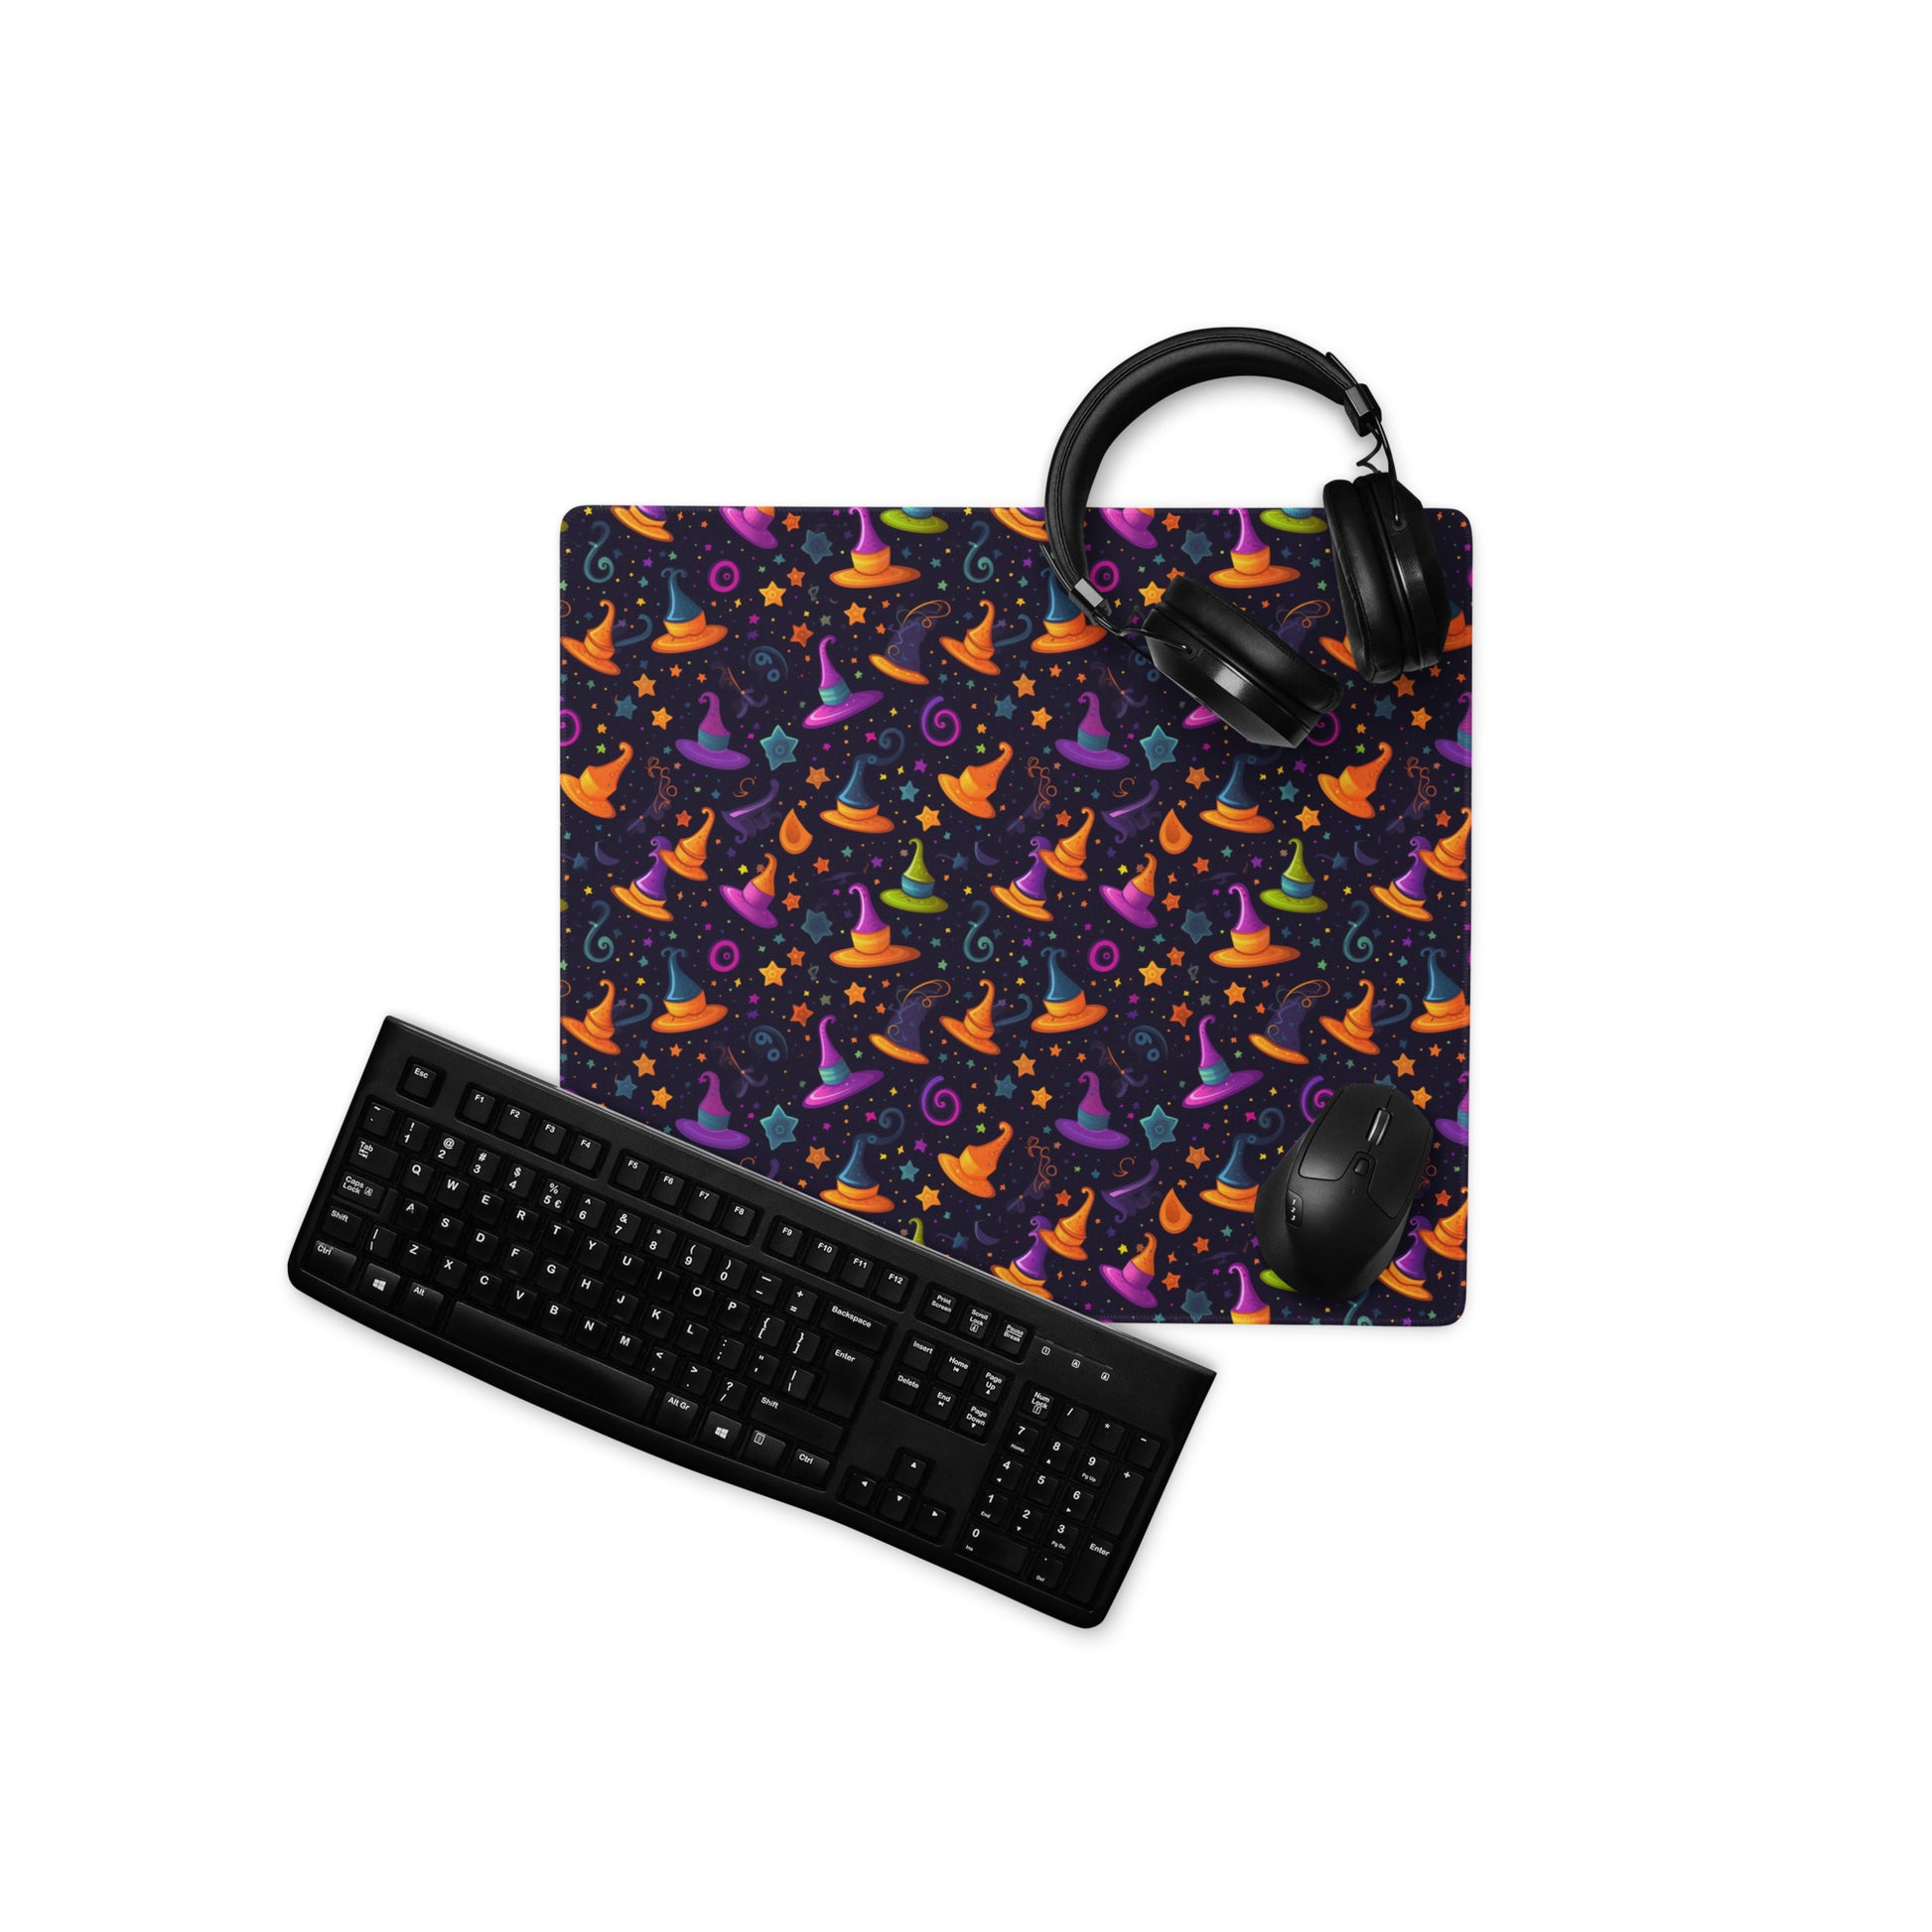 A 18" x 16" desk pad with a orange and purple wizard hat pattern. With a keyboard, mouse, and headphones sitting on it.